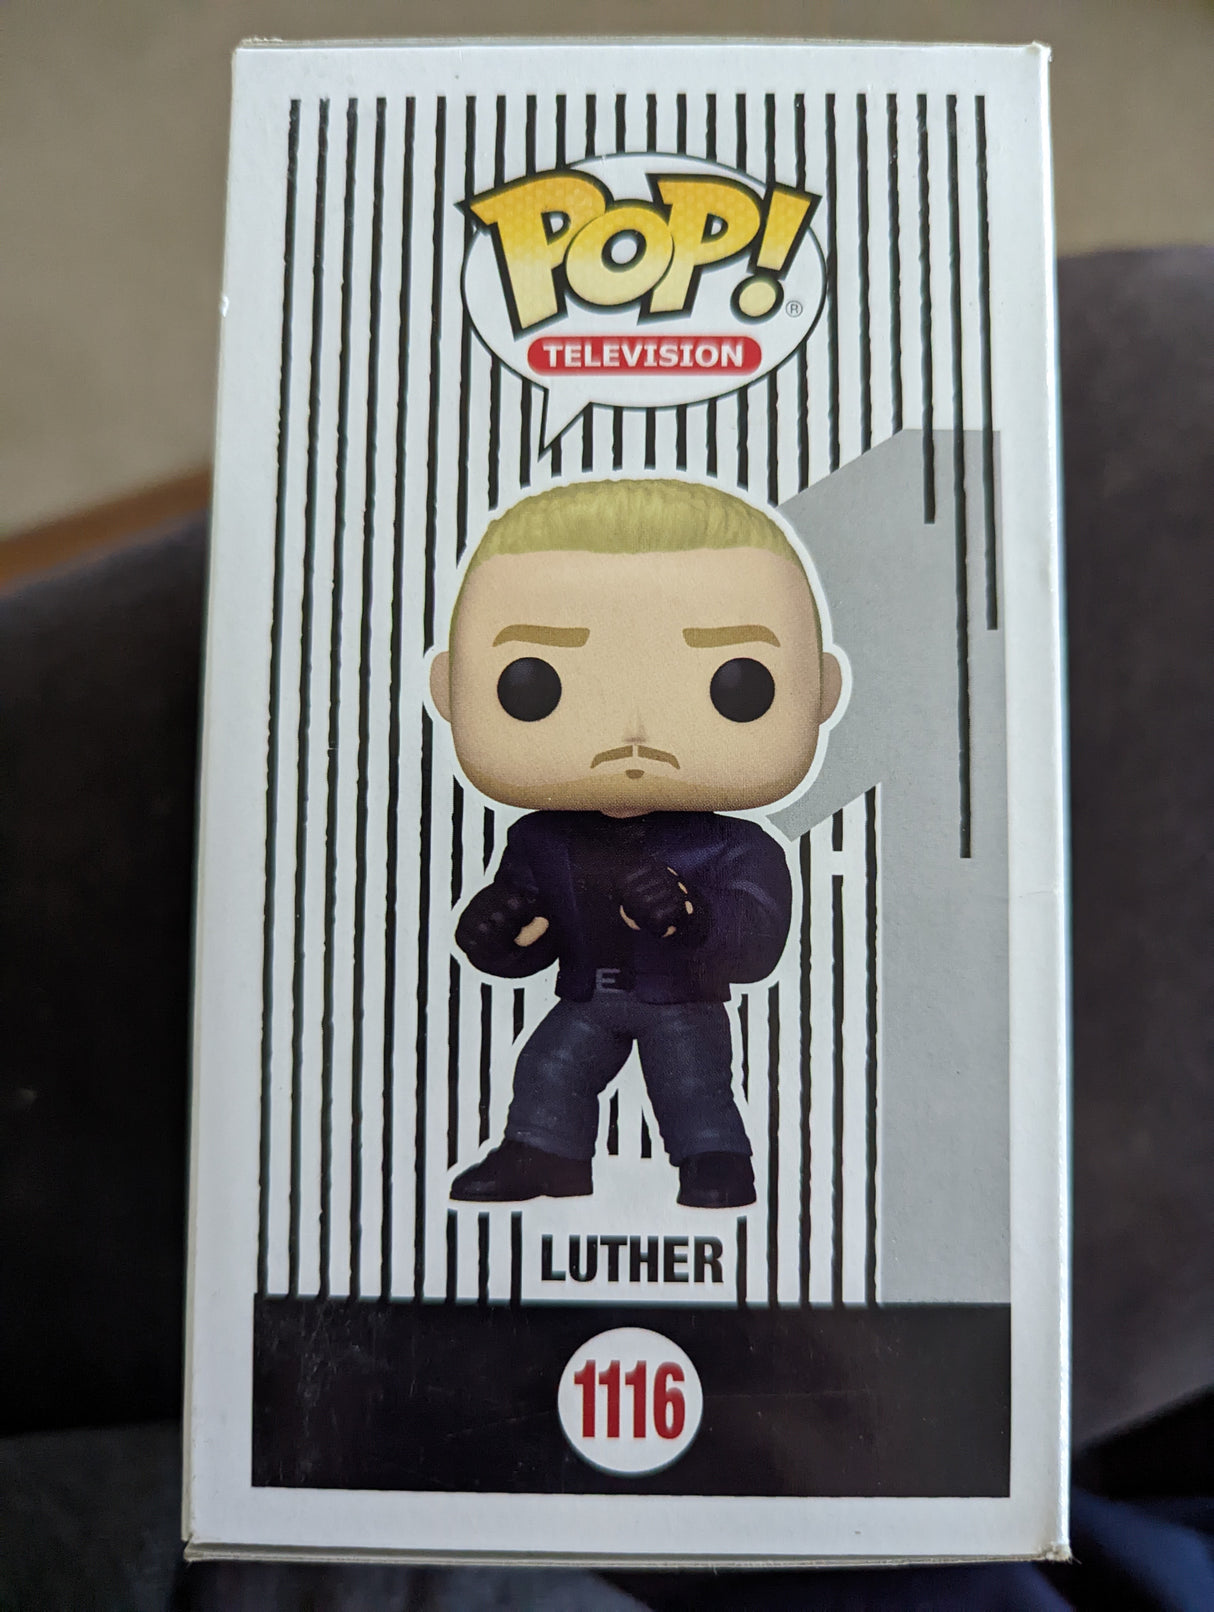 Damaged Box Funko Pop Television - The Umbrella Academy - Luther #1116 (6989944586340)